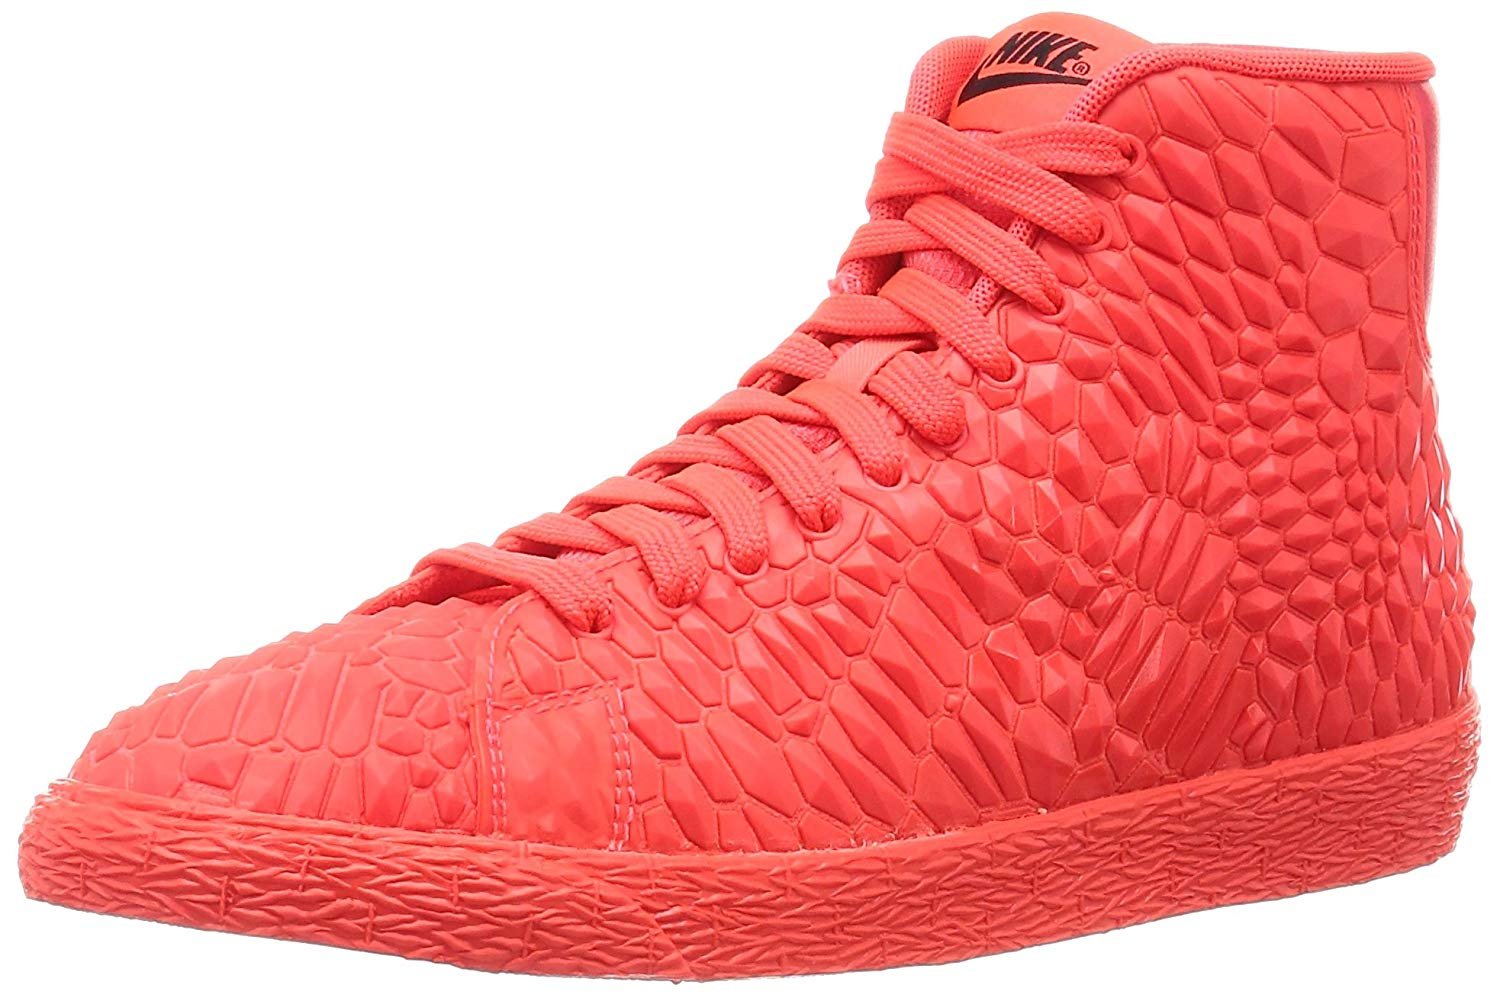 Nike Women's Blazer Mid DMB Casual Shoes - image 1 of 7